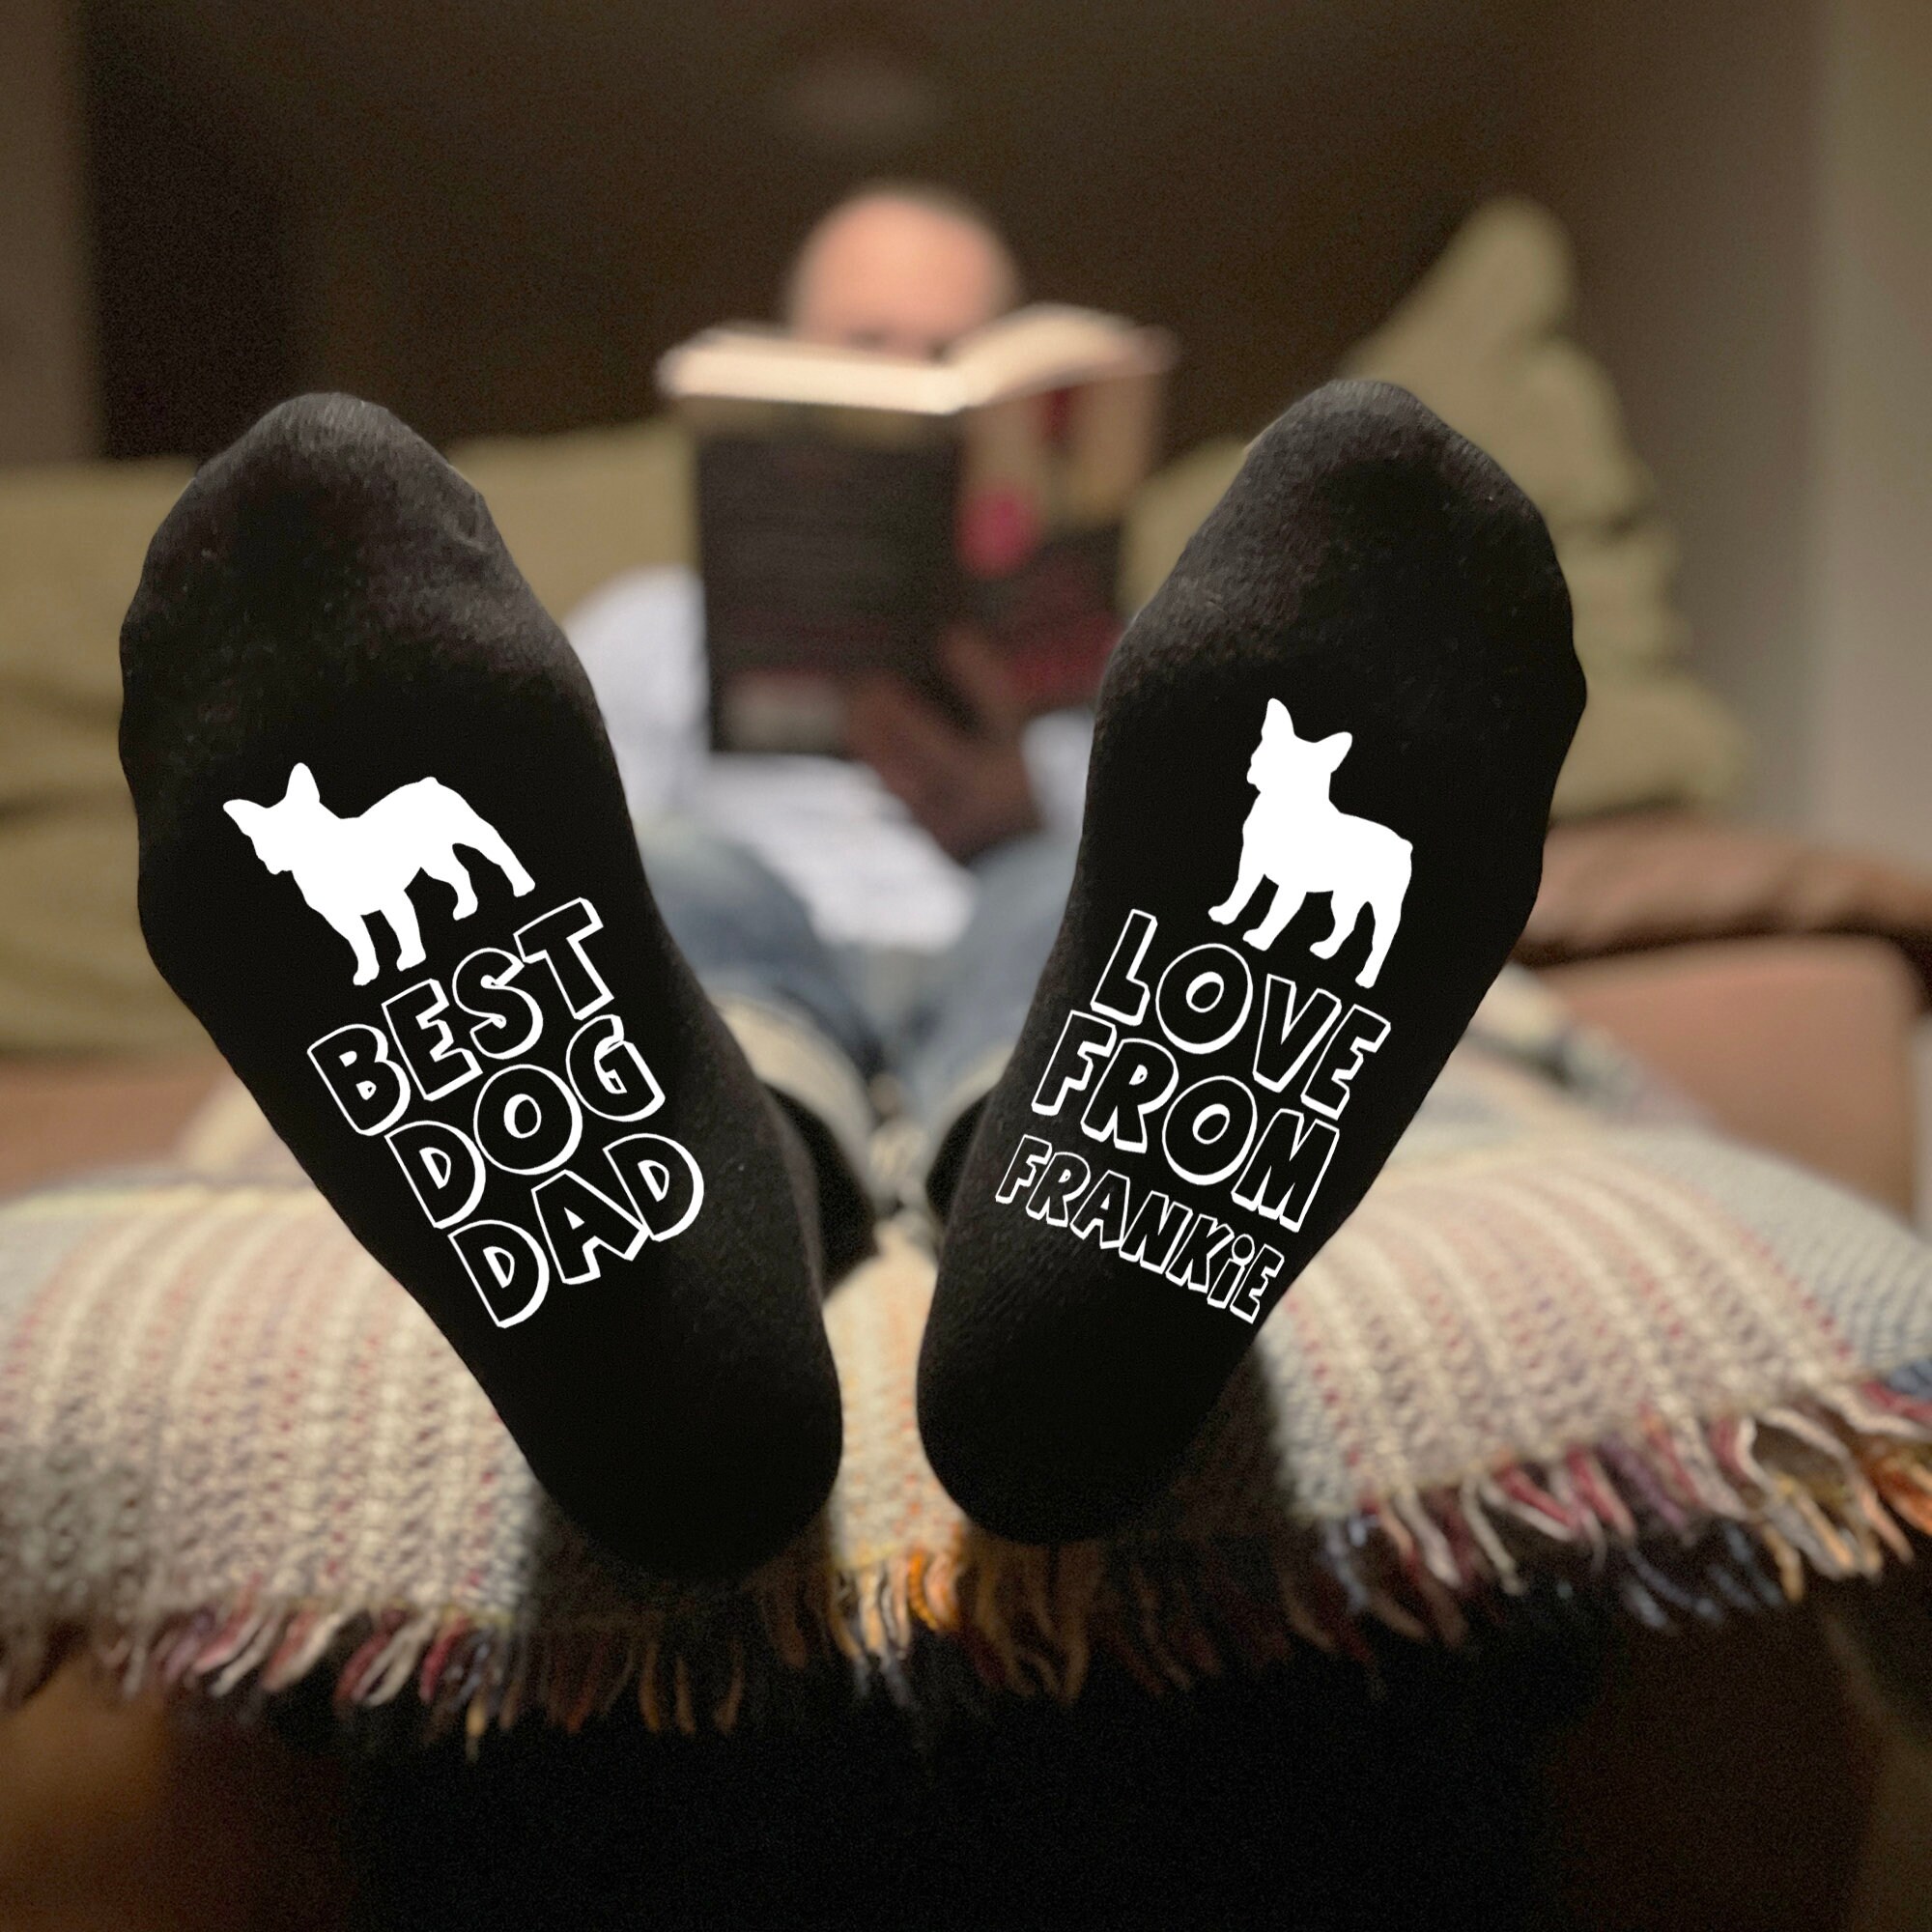 Personalised With Name & Dog Breed Best Dad Socks Great Gift For Christmas